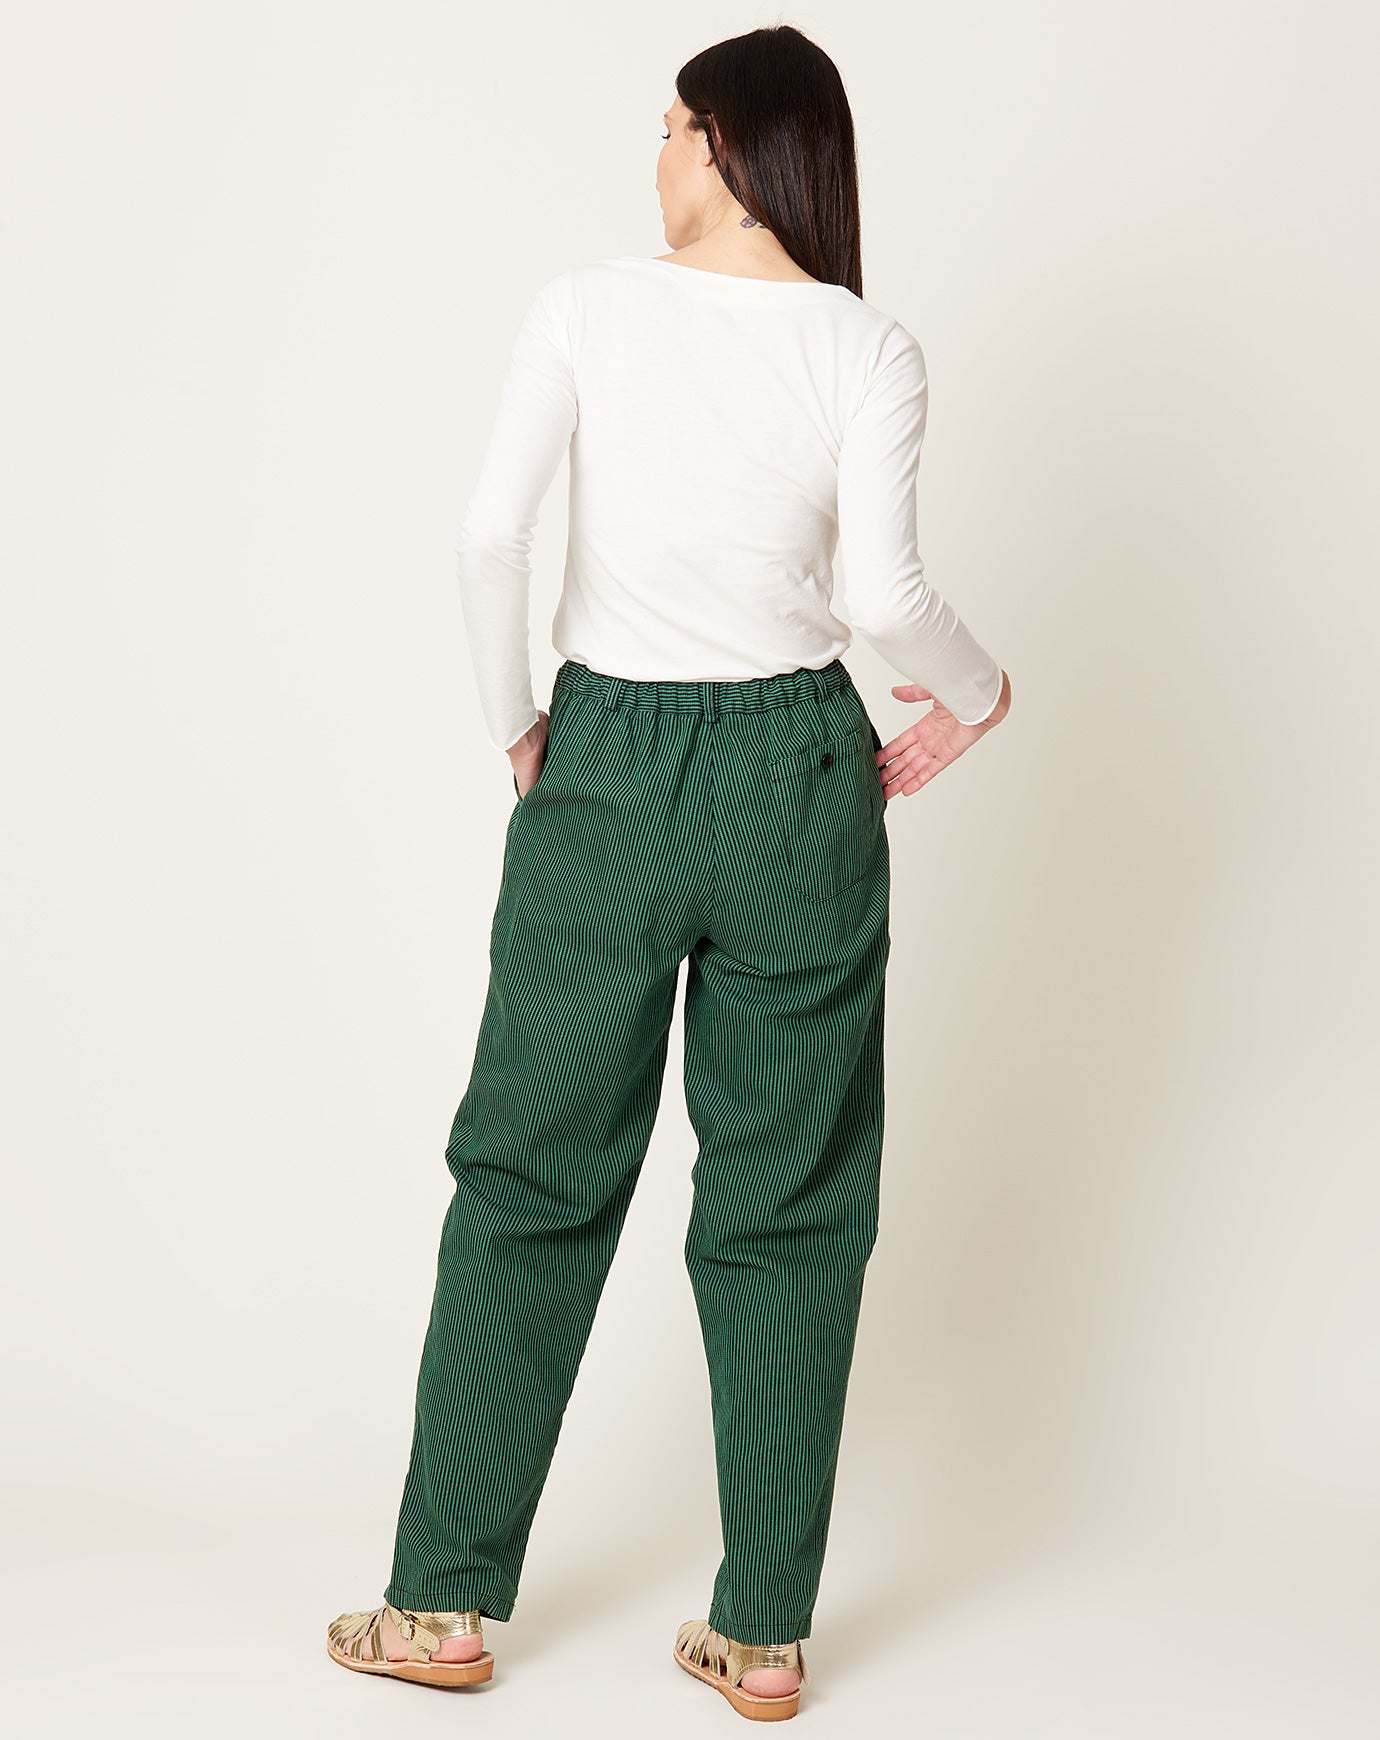 Sultan Wash Striped Butcher Baggy Pant in Faded Green